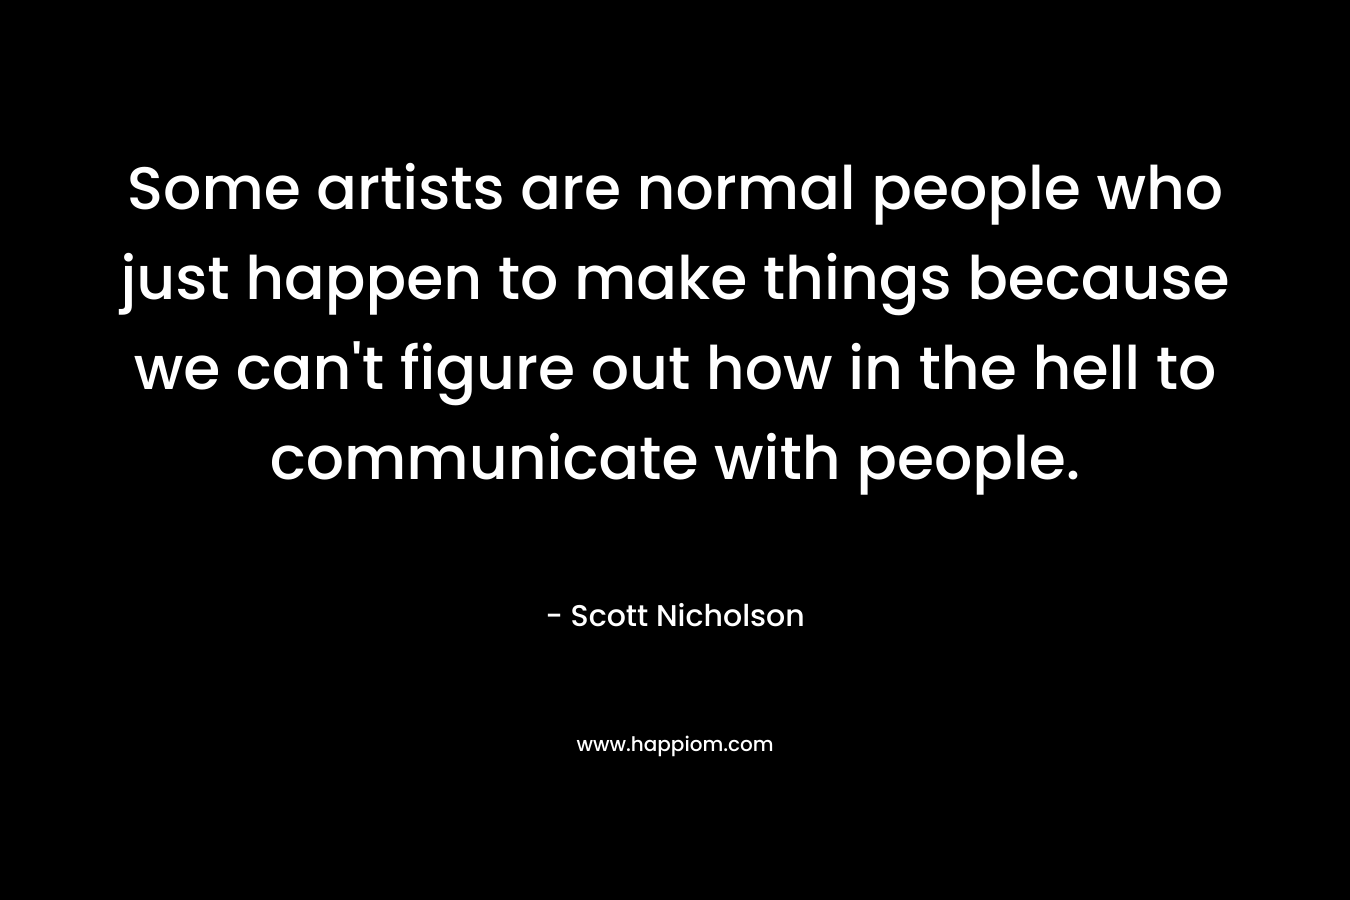 Some artists are normal people who just happen to make things because we can't figure out how in the hell to communicate with people.